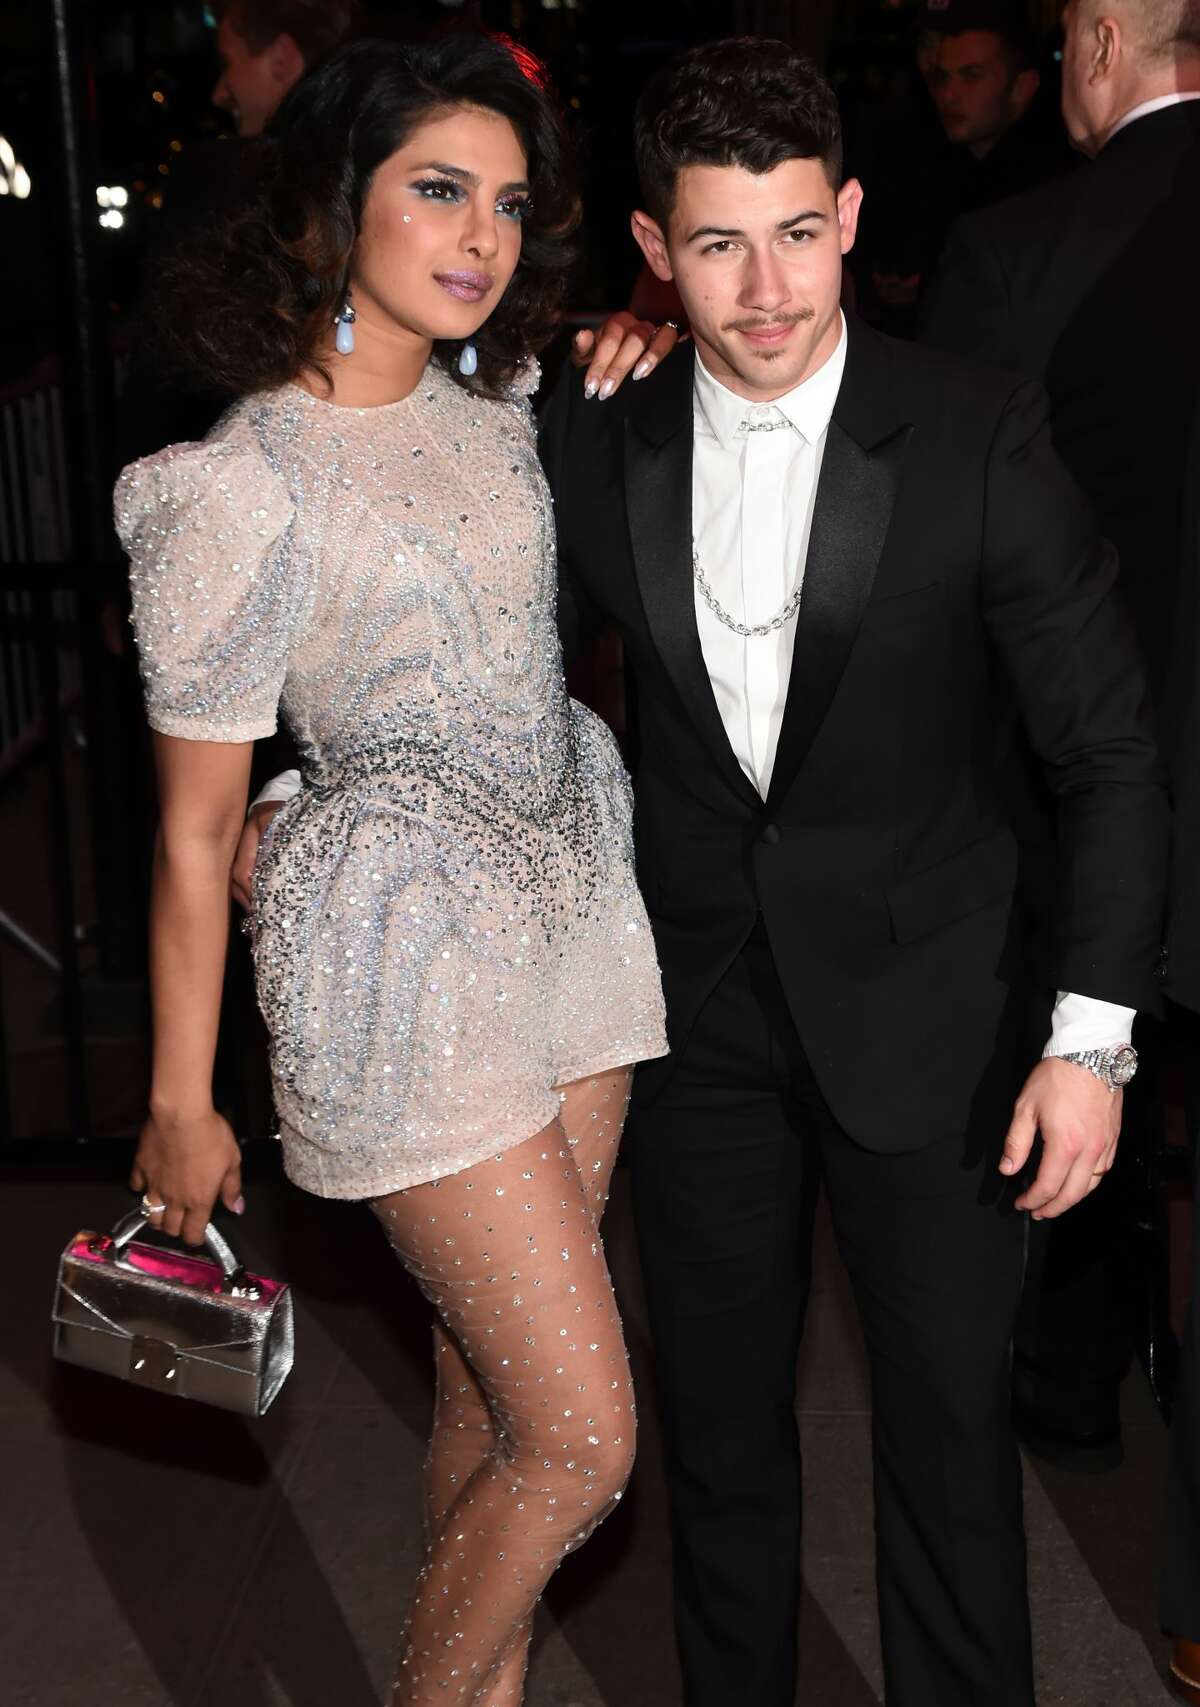 NEW YORK, NEW YORK - MAY 06: Priyanka Chopra and Nick Jonas attend the 2019 Met Gala Boom Boom Afterparty at The Standard hotel on May 06, 2019 in New York City. (Photo by Daniel Zuchnik/GC Images)